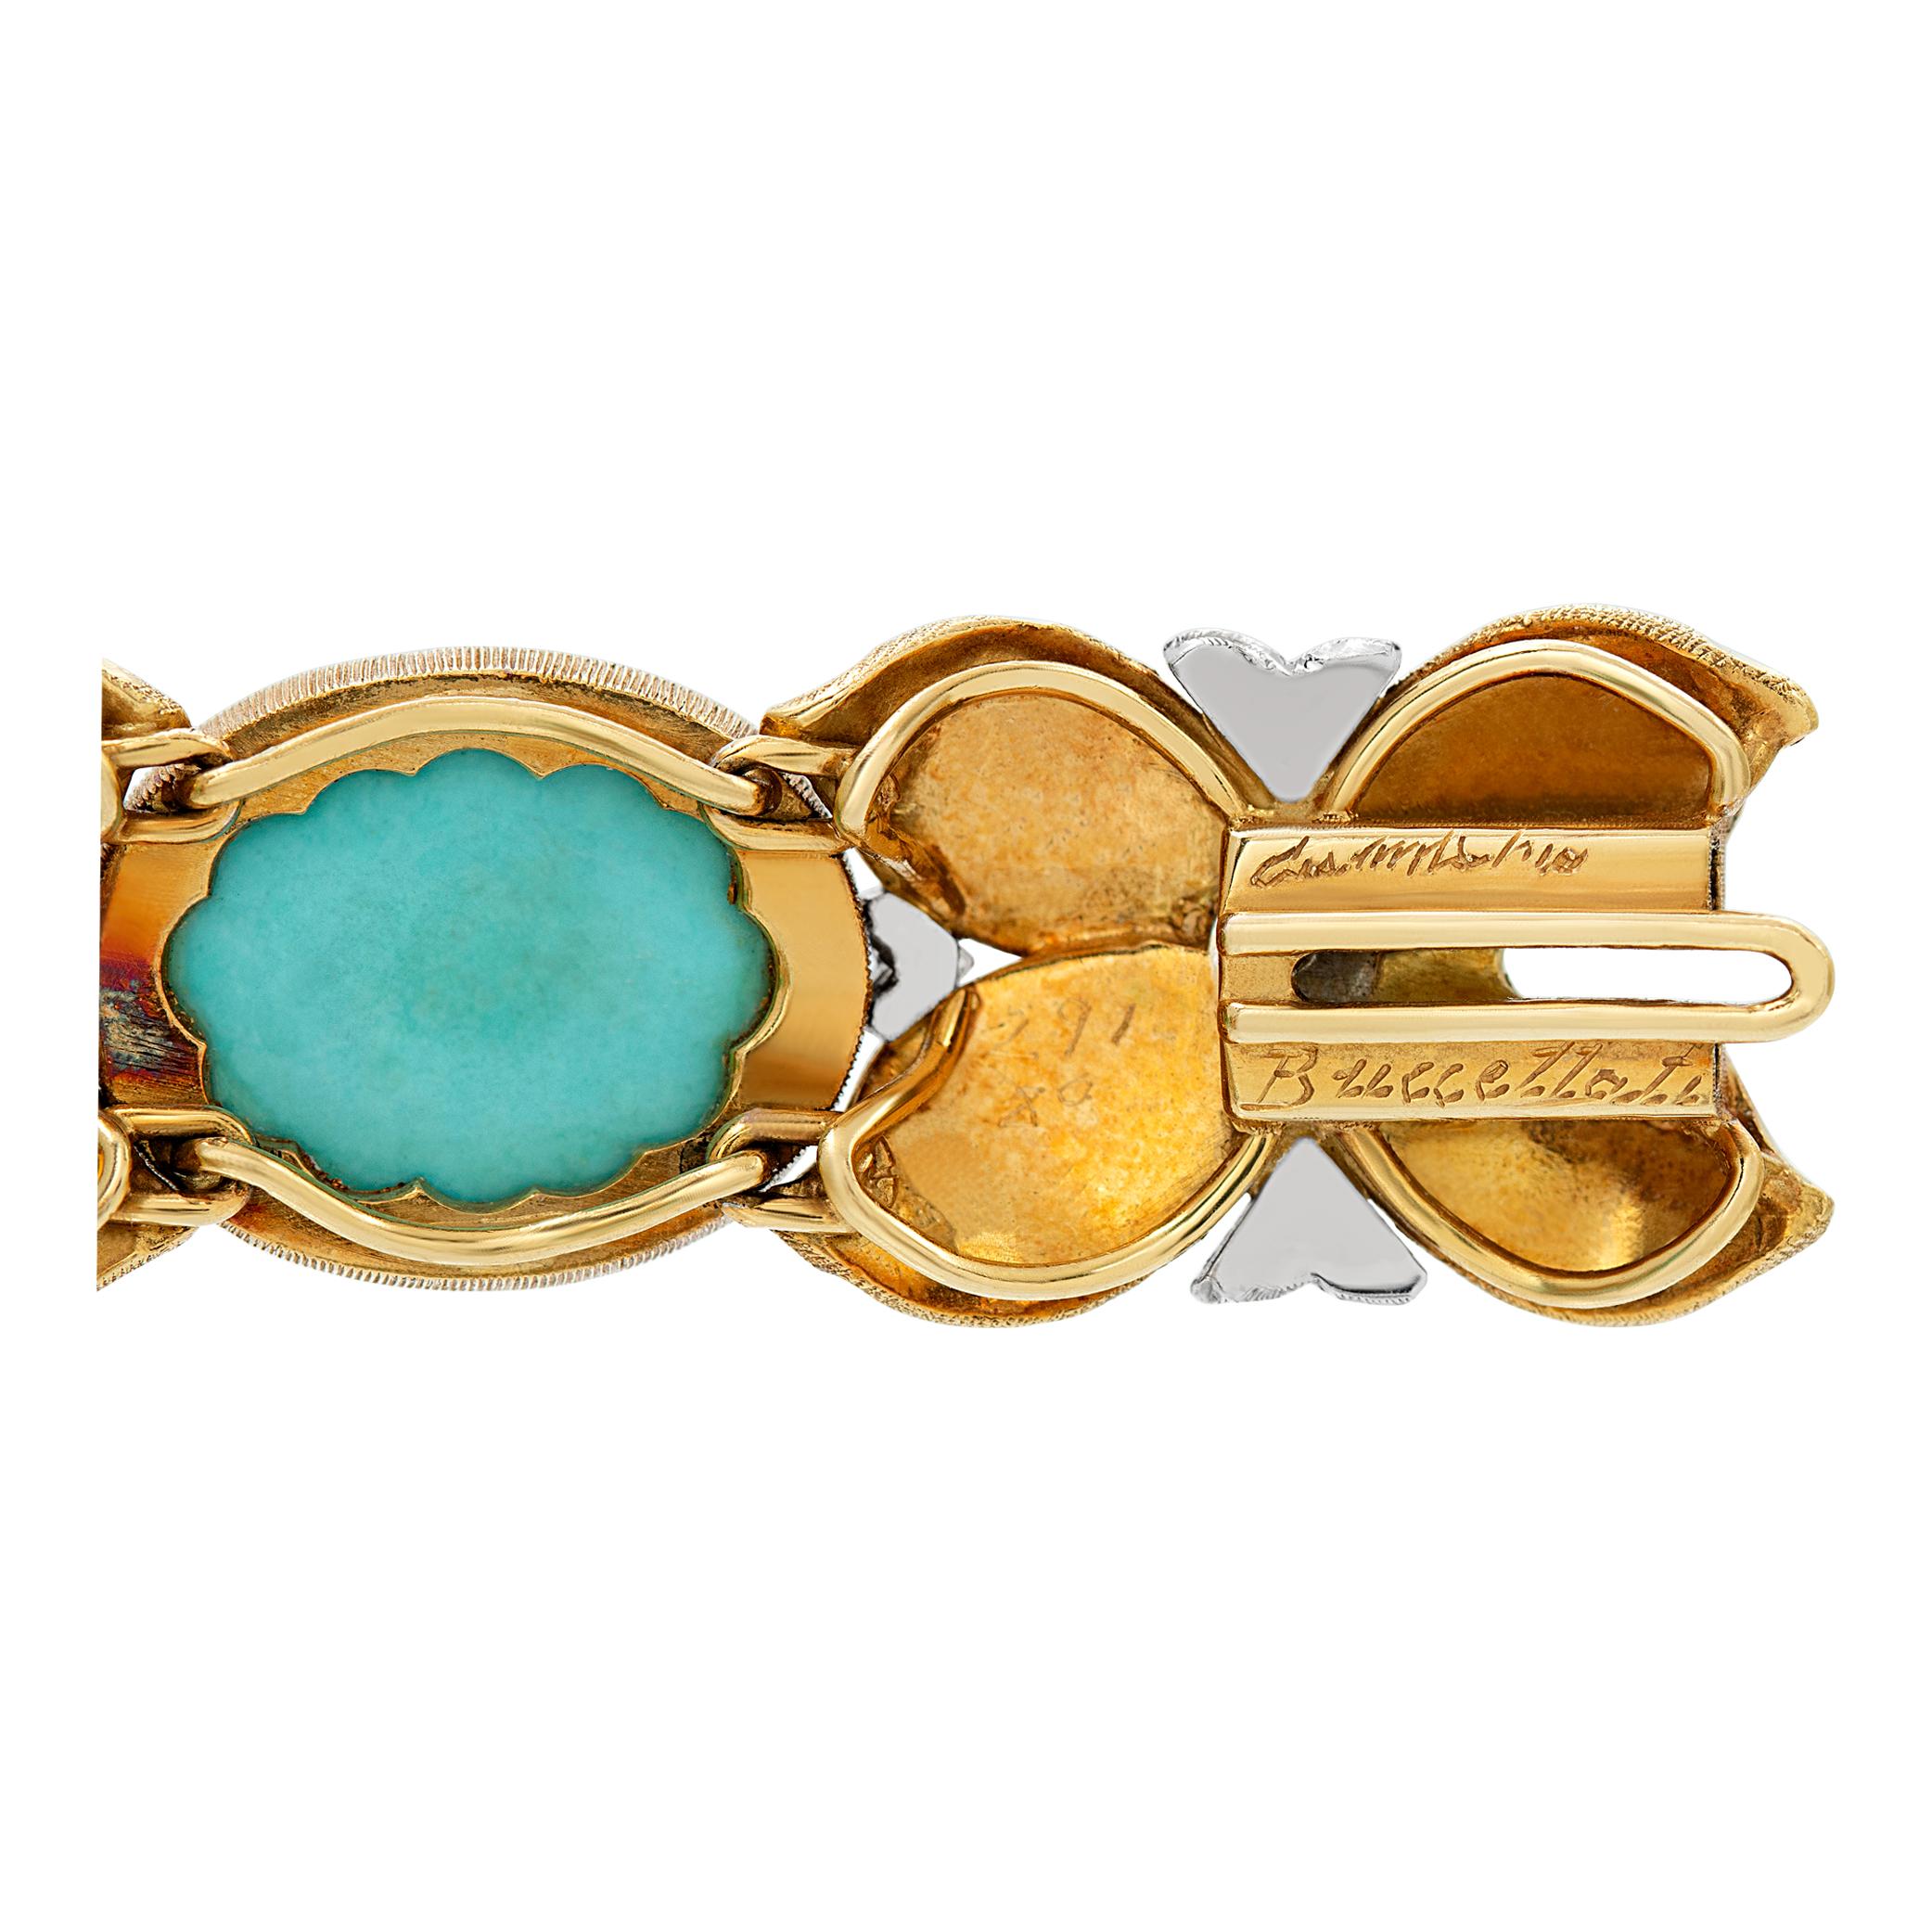 Buccellati leaf design pearl and turquoise bracelet in 18k yellow and white gold. 6mm pearls. 7.25 inches long, 0.50 inches wide. Circa 1970's.